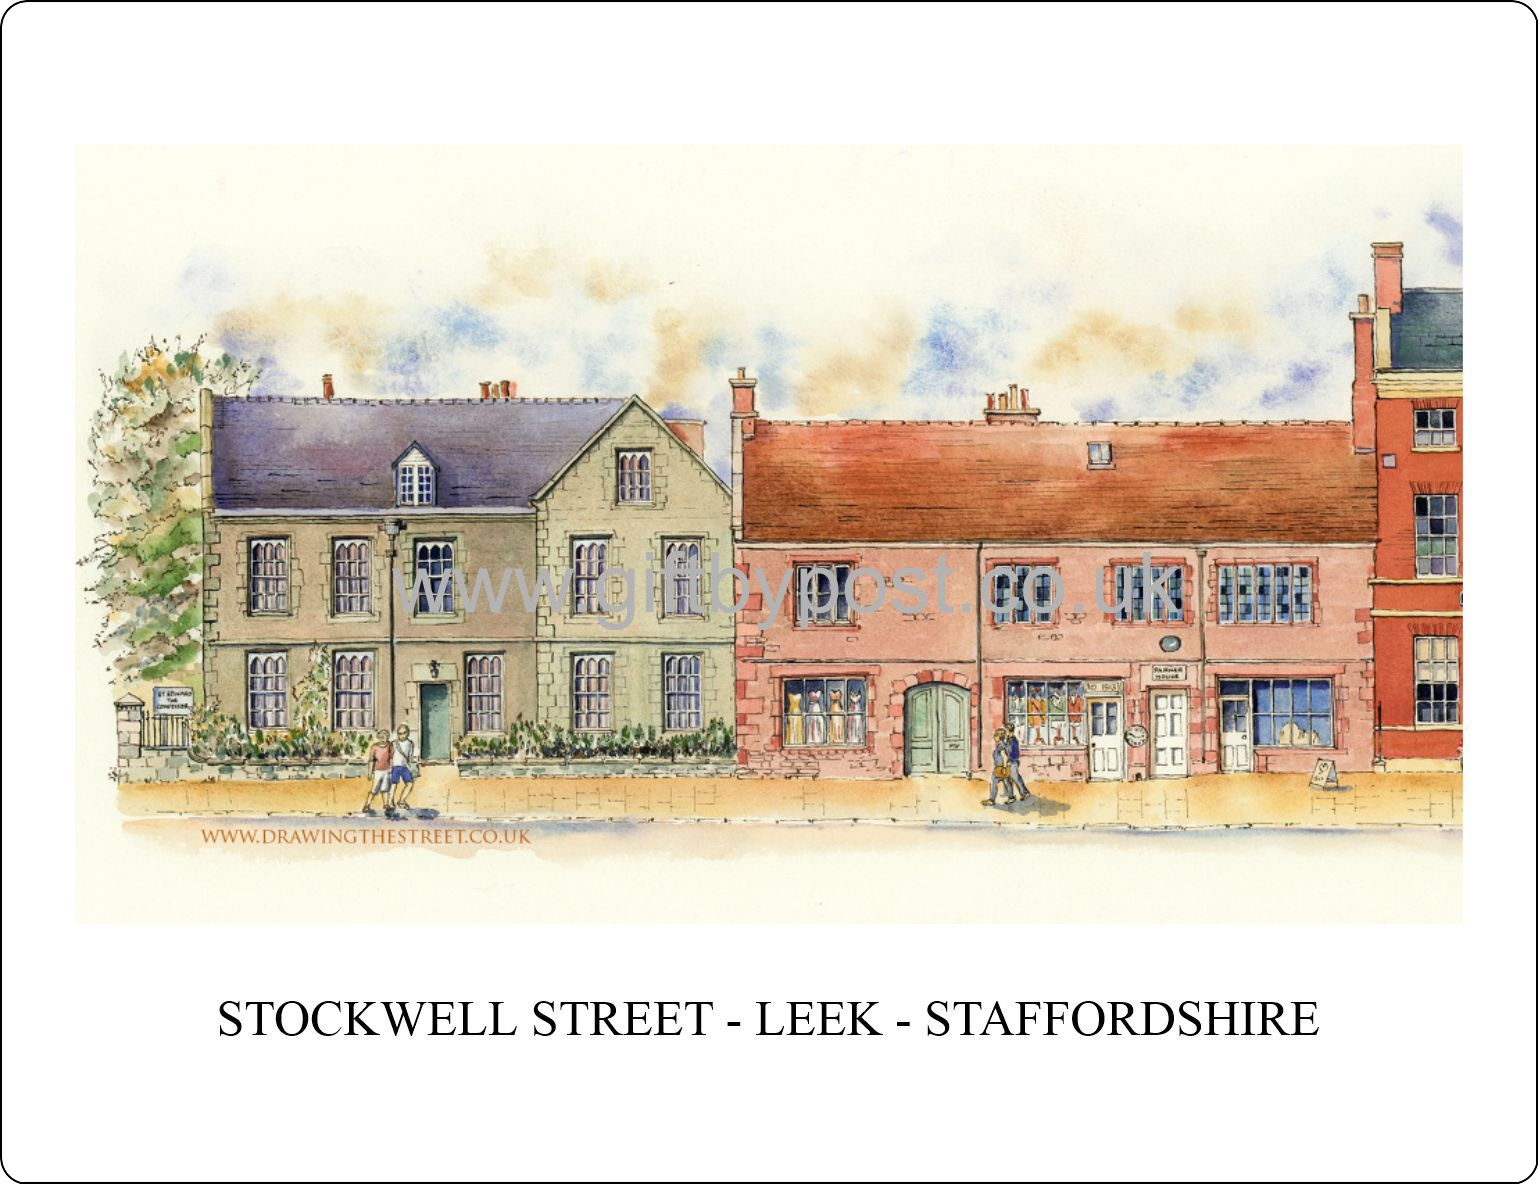 Placemat - Leek Staffordshire - Stockwell Street (1)